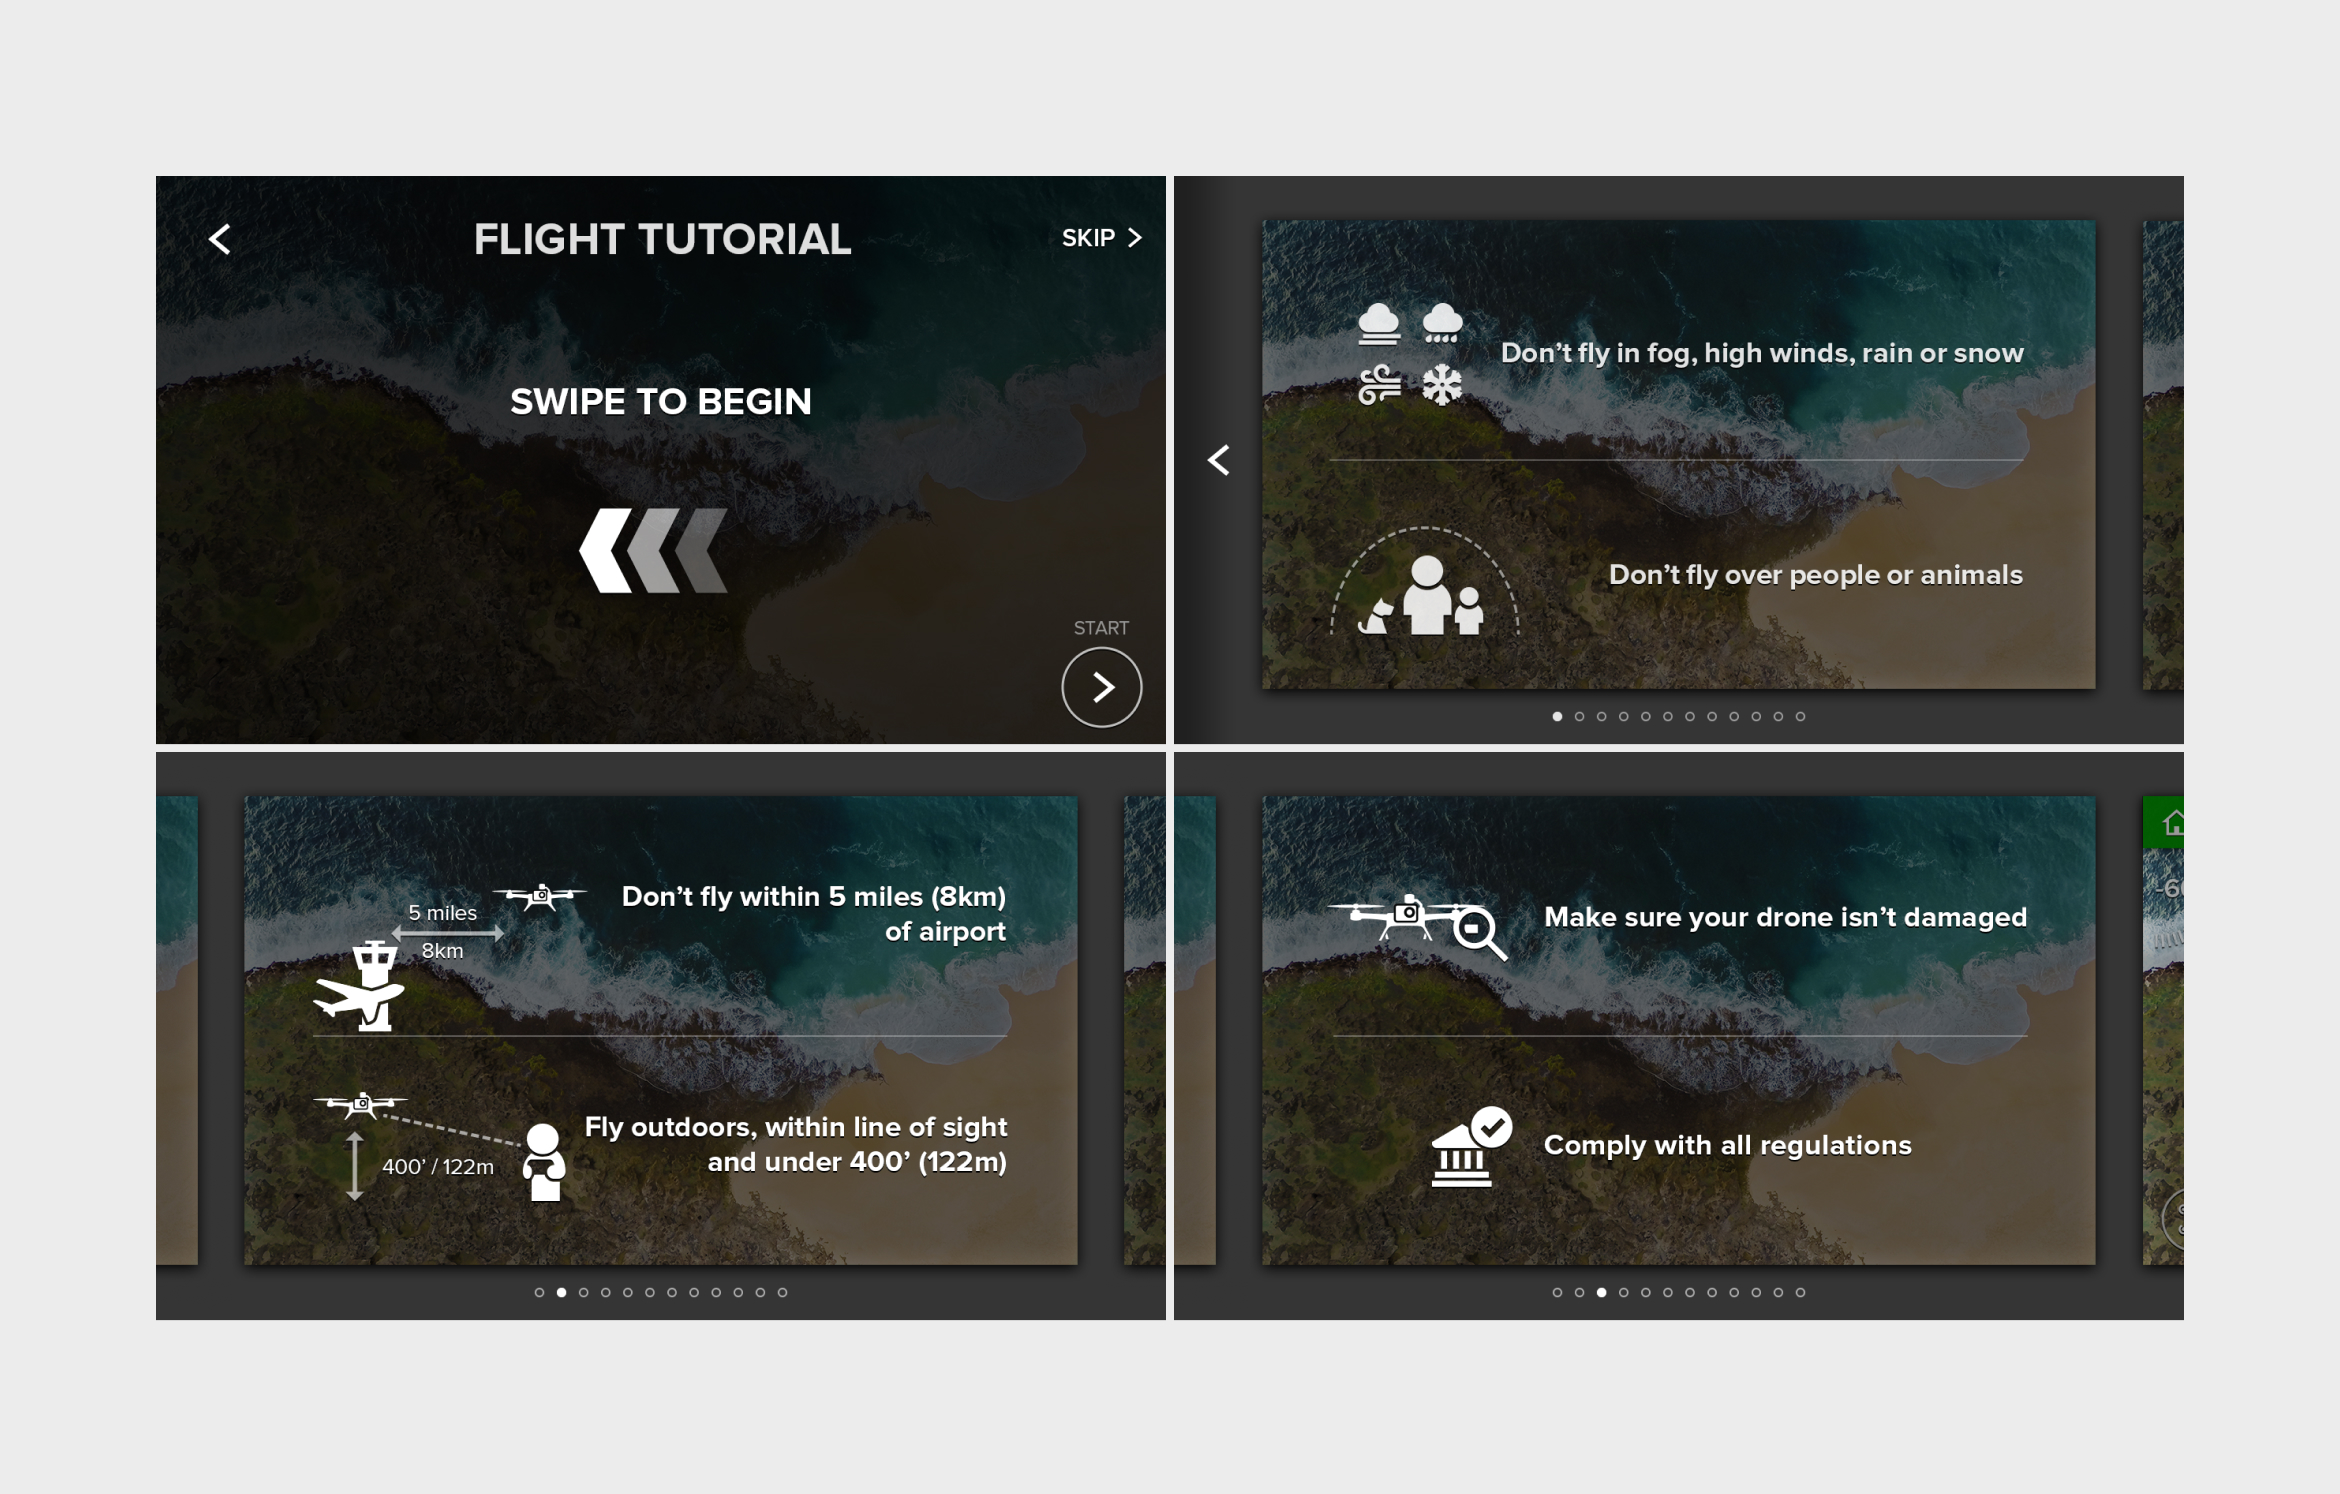 Flight tutorial and safety information which displays before the drone's first flight.